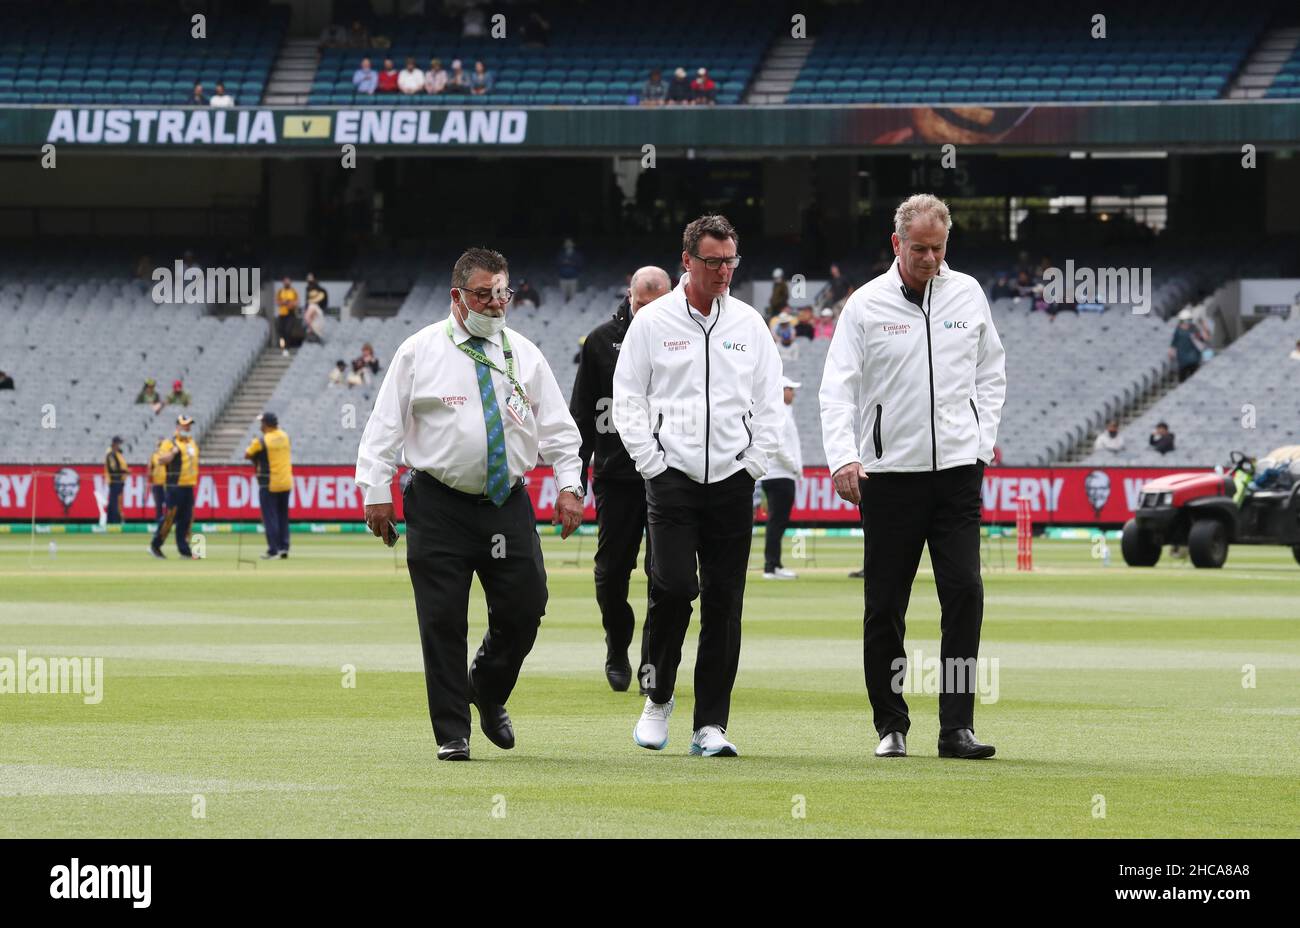 Match referee David Boon ( Left ) with umpires Rod Tucker and Paul Reifflel during day two of the third Ashes test at the Melbourne Cricket Ground, Melbourne. Picture date: Monday December 27, 2021. Stock Photo